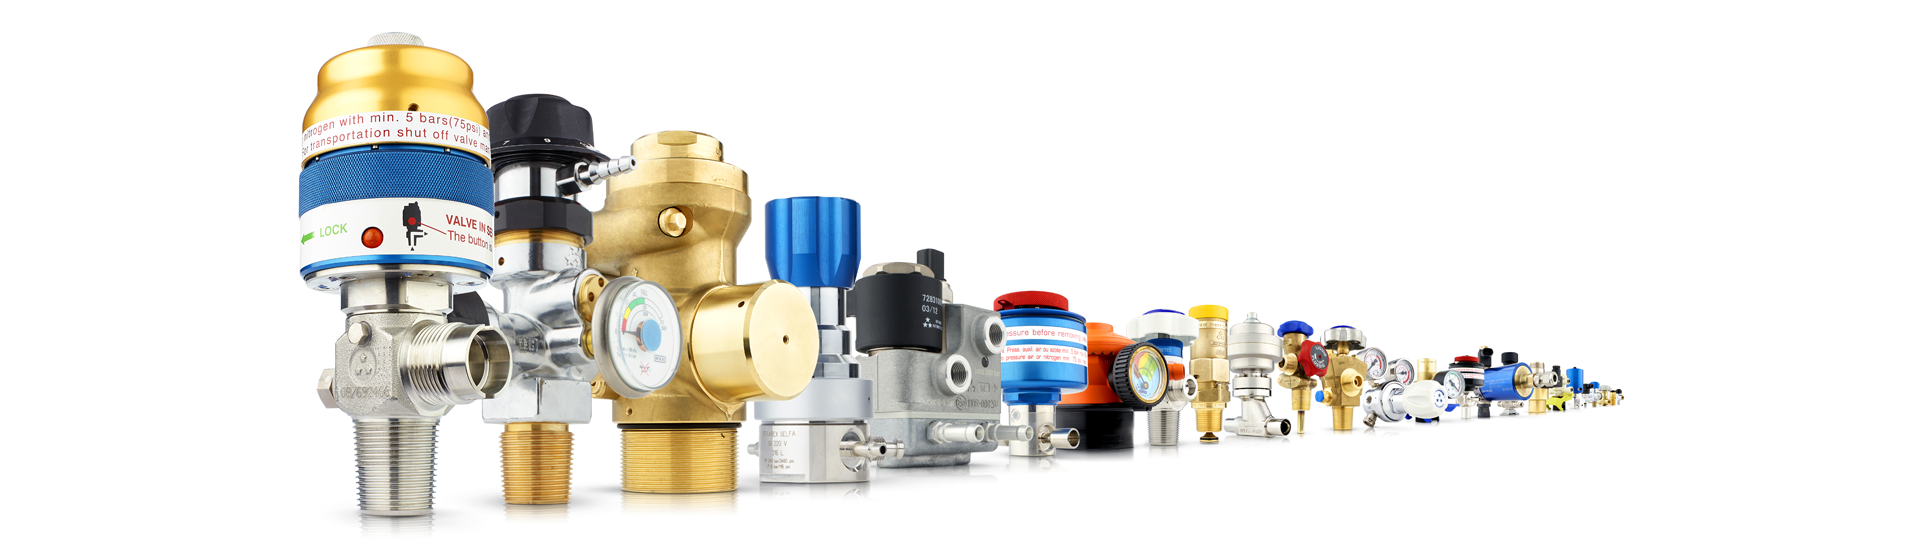 High quality Rotarex gas control valves, pressure regulators & fittings give confidence down all product lines.